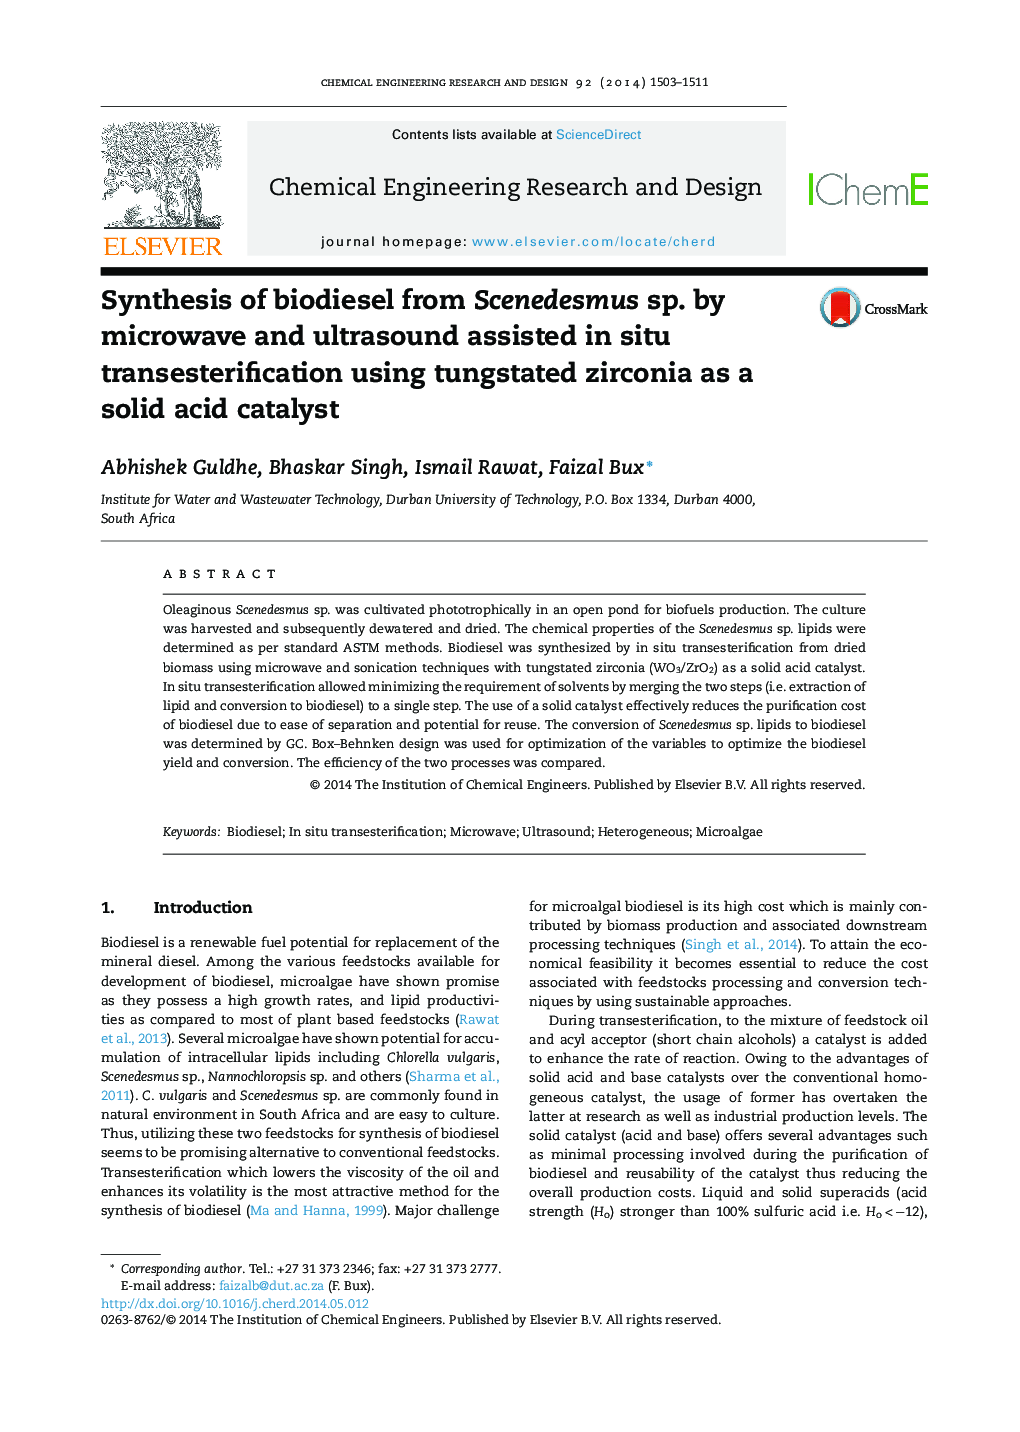 Synthesis of biodiesel from Scenedesmus sp. by microwave and ultrasound assisted in situ transesterification using tungstated zirconia as a solid acid catalyst